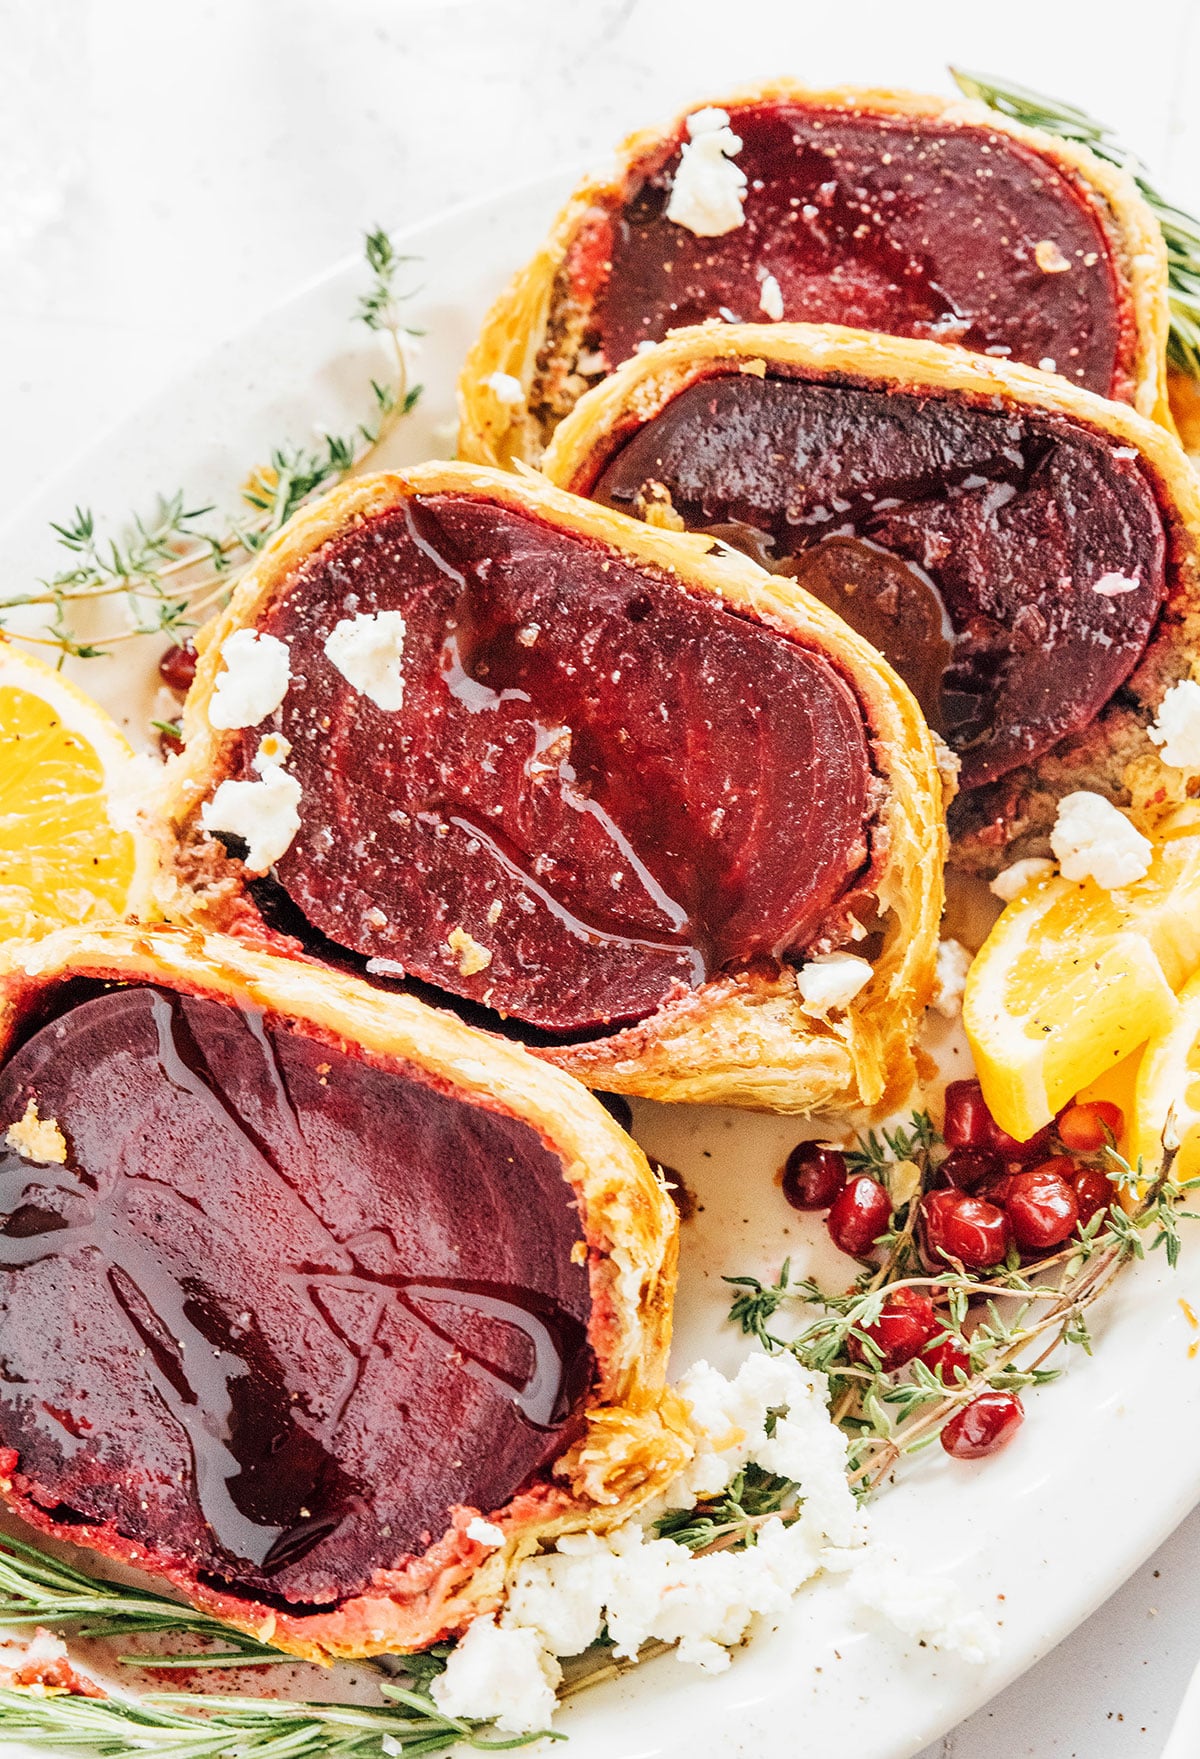 Slices of beet Wellington on a serving platter with fresh herbs and orange slices.